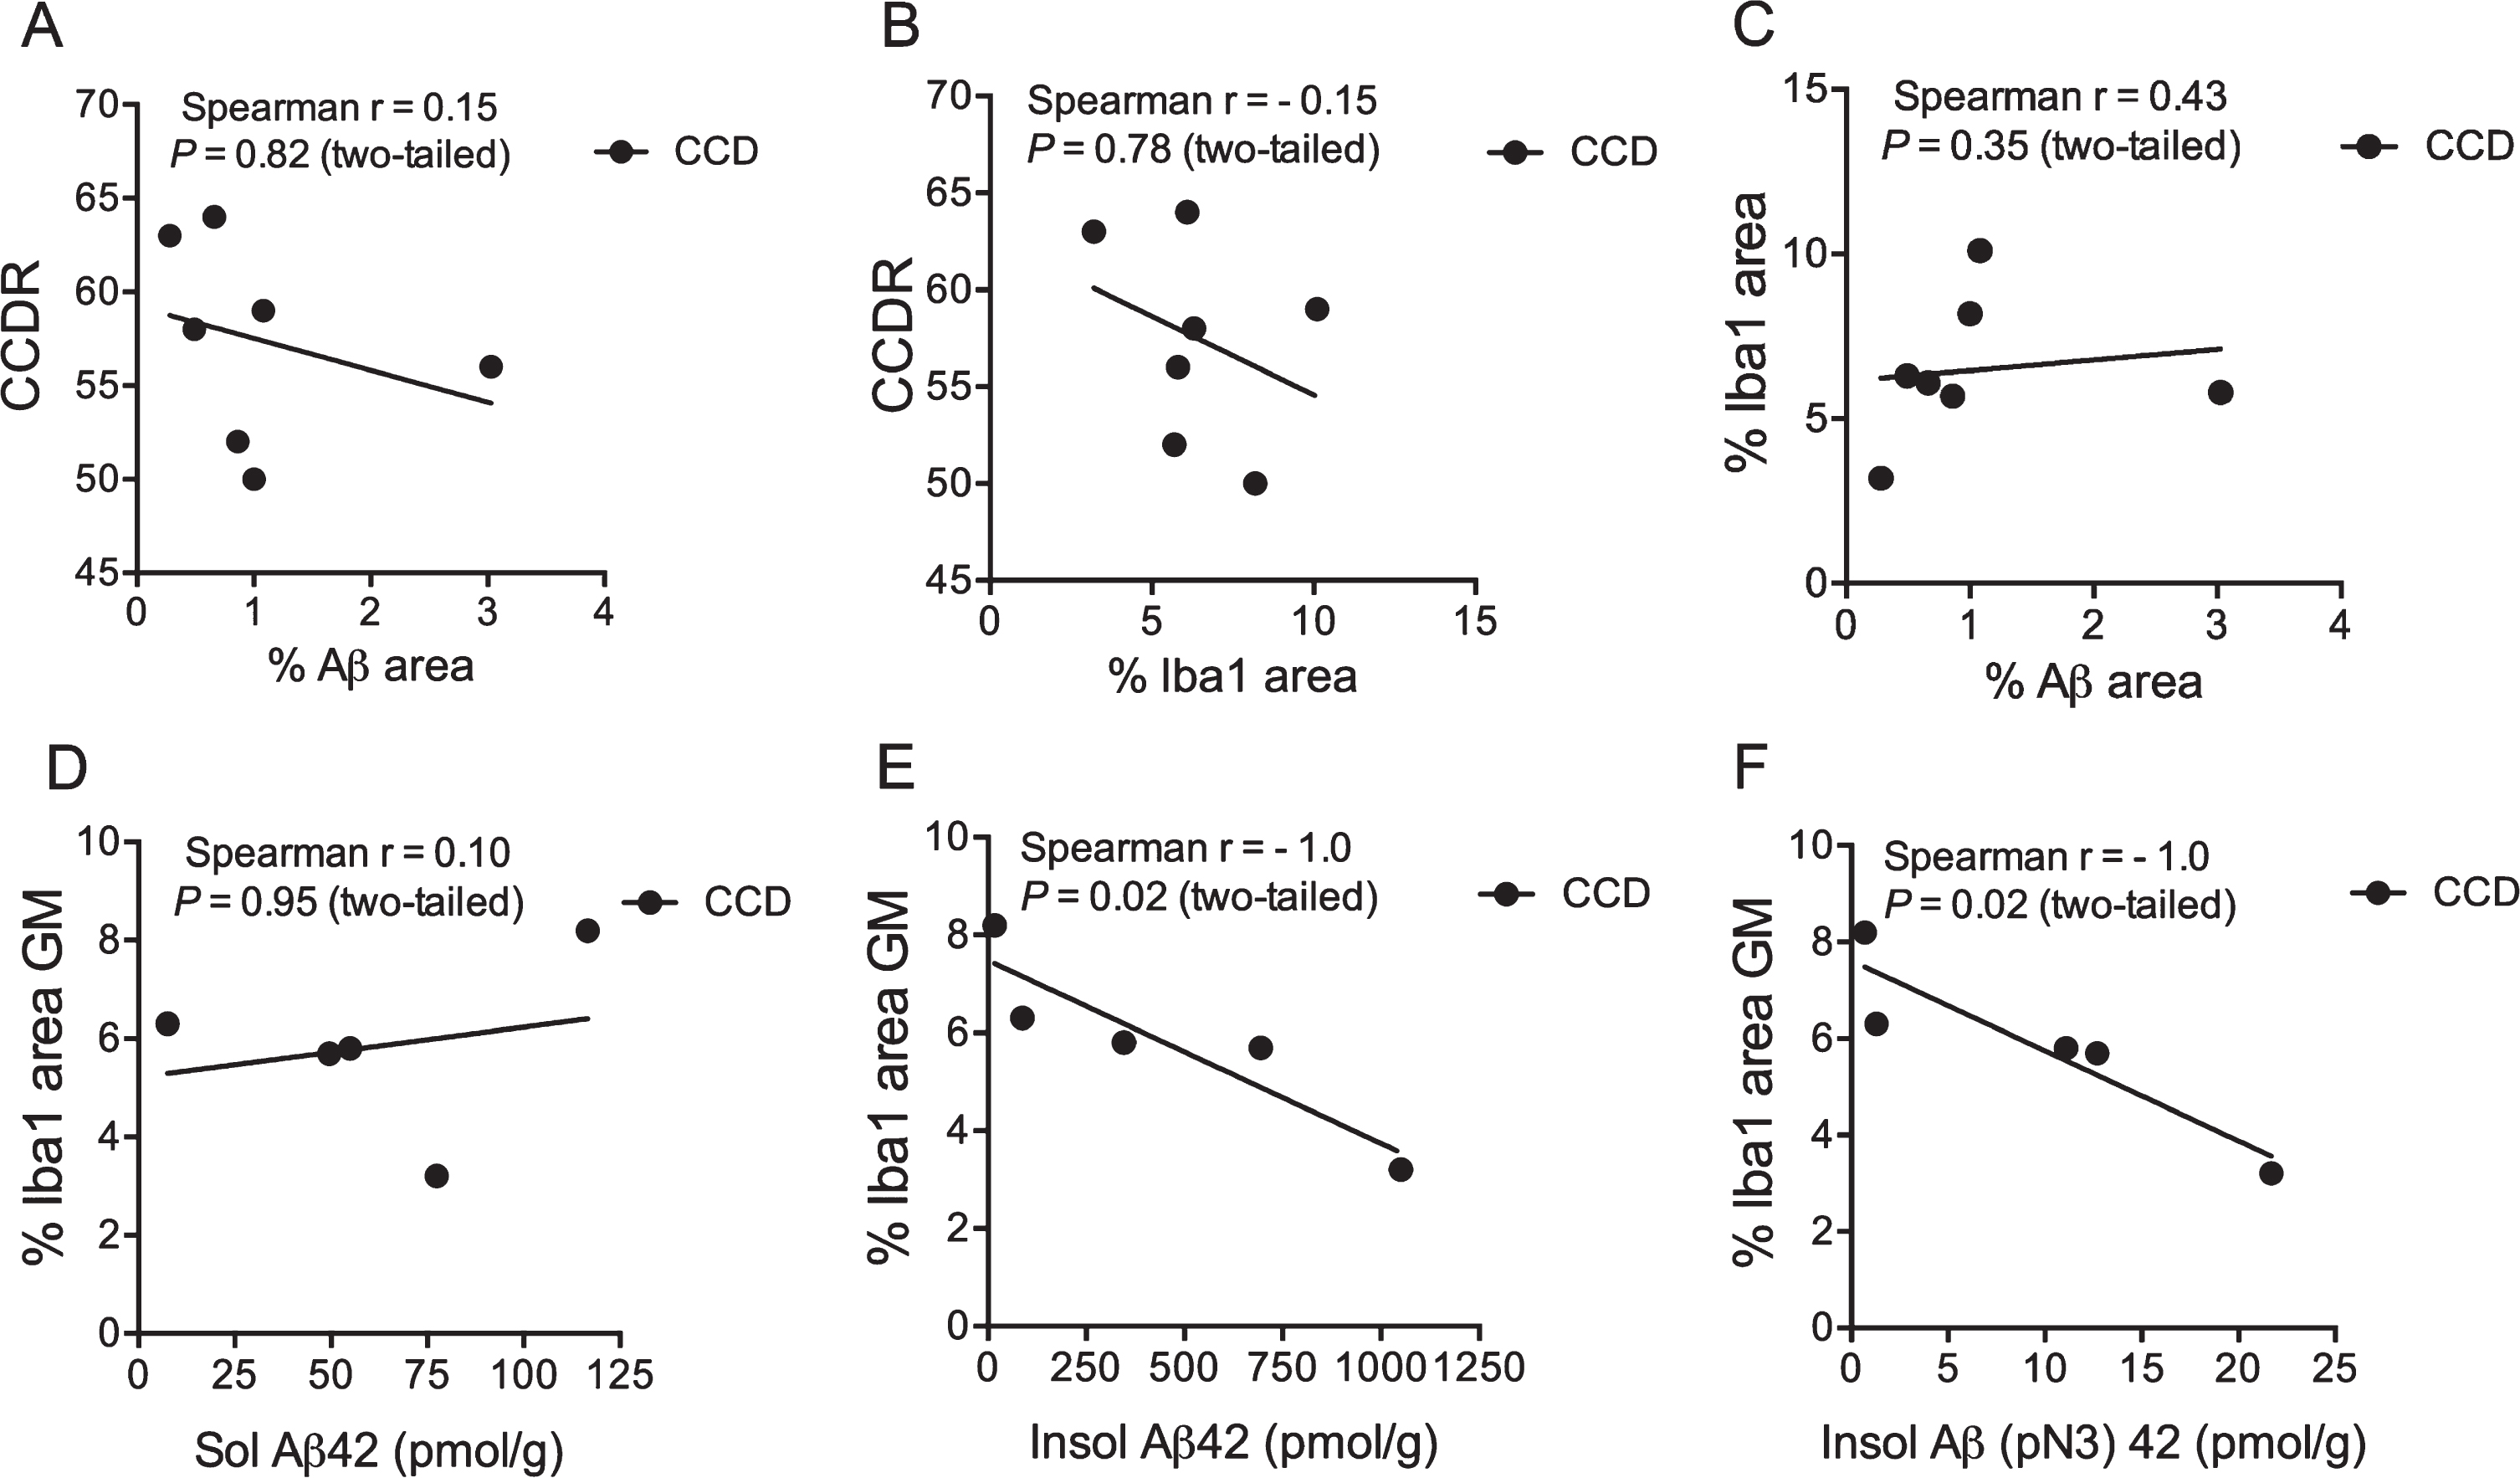 Microglial response correlates with insoluble Aβ42 and Aβ(N3pE)-42. A-C) Correlation analysis showed no correlation between the CCDR score for CCD dogs and the %Aβ area (A), or the %Iba1 area (B). Neither did the %Iba1 area correlate with the %Aβ area (C). D-F) No correlation was observed when comparing %Iba1 area in grey matter with soluble Aβ42 (D), but the %Iba1 area in grey matter correlated with the insoluble Aβ42 level (E) and Aβ(pN3)42 (F). p = 0.02, both datasets, Spearman.